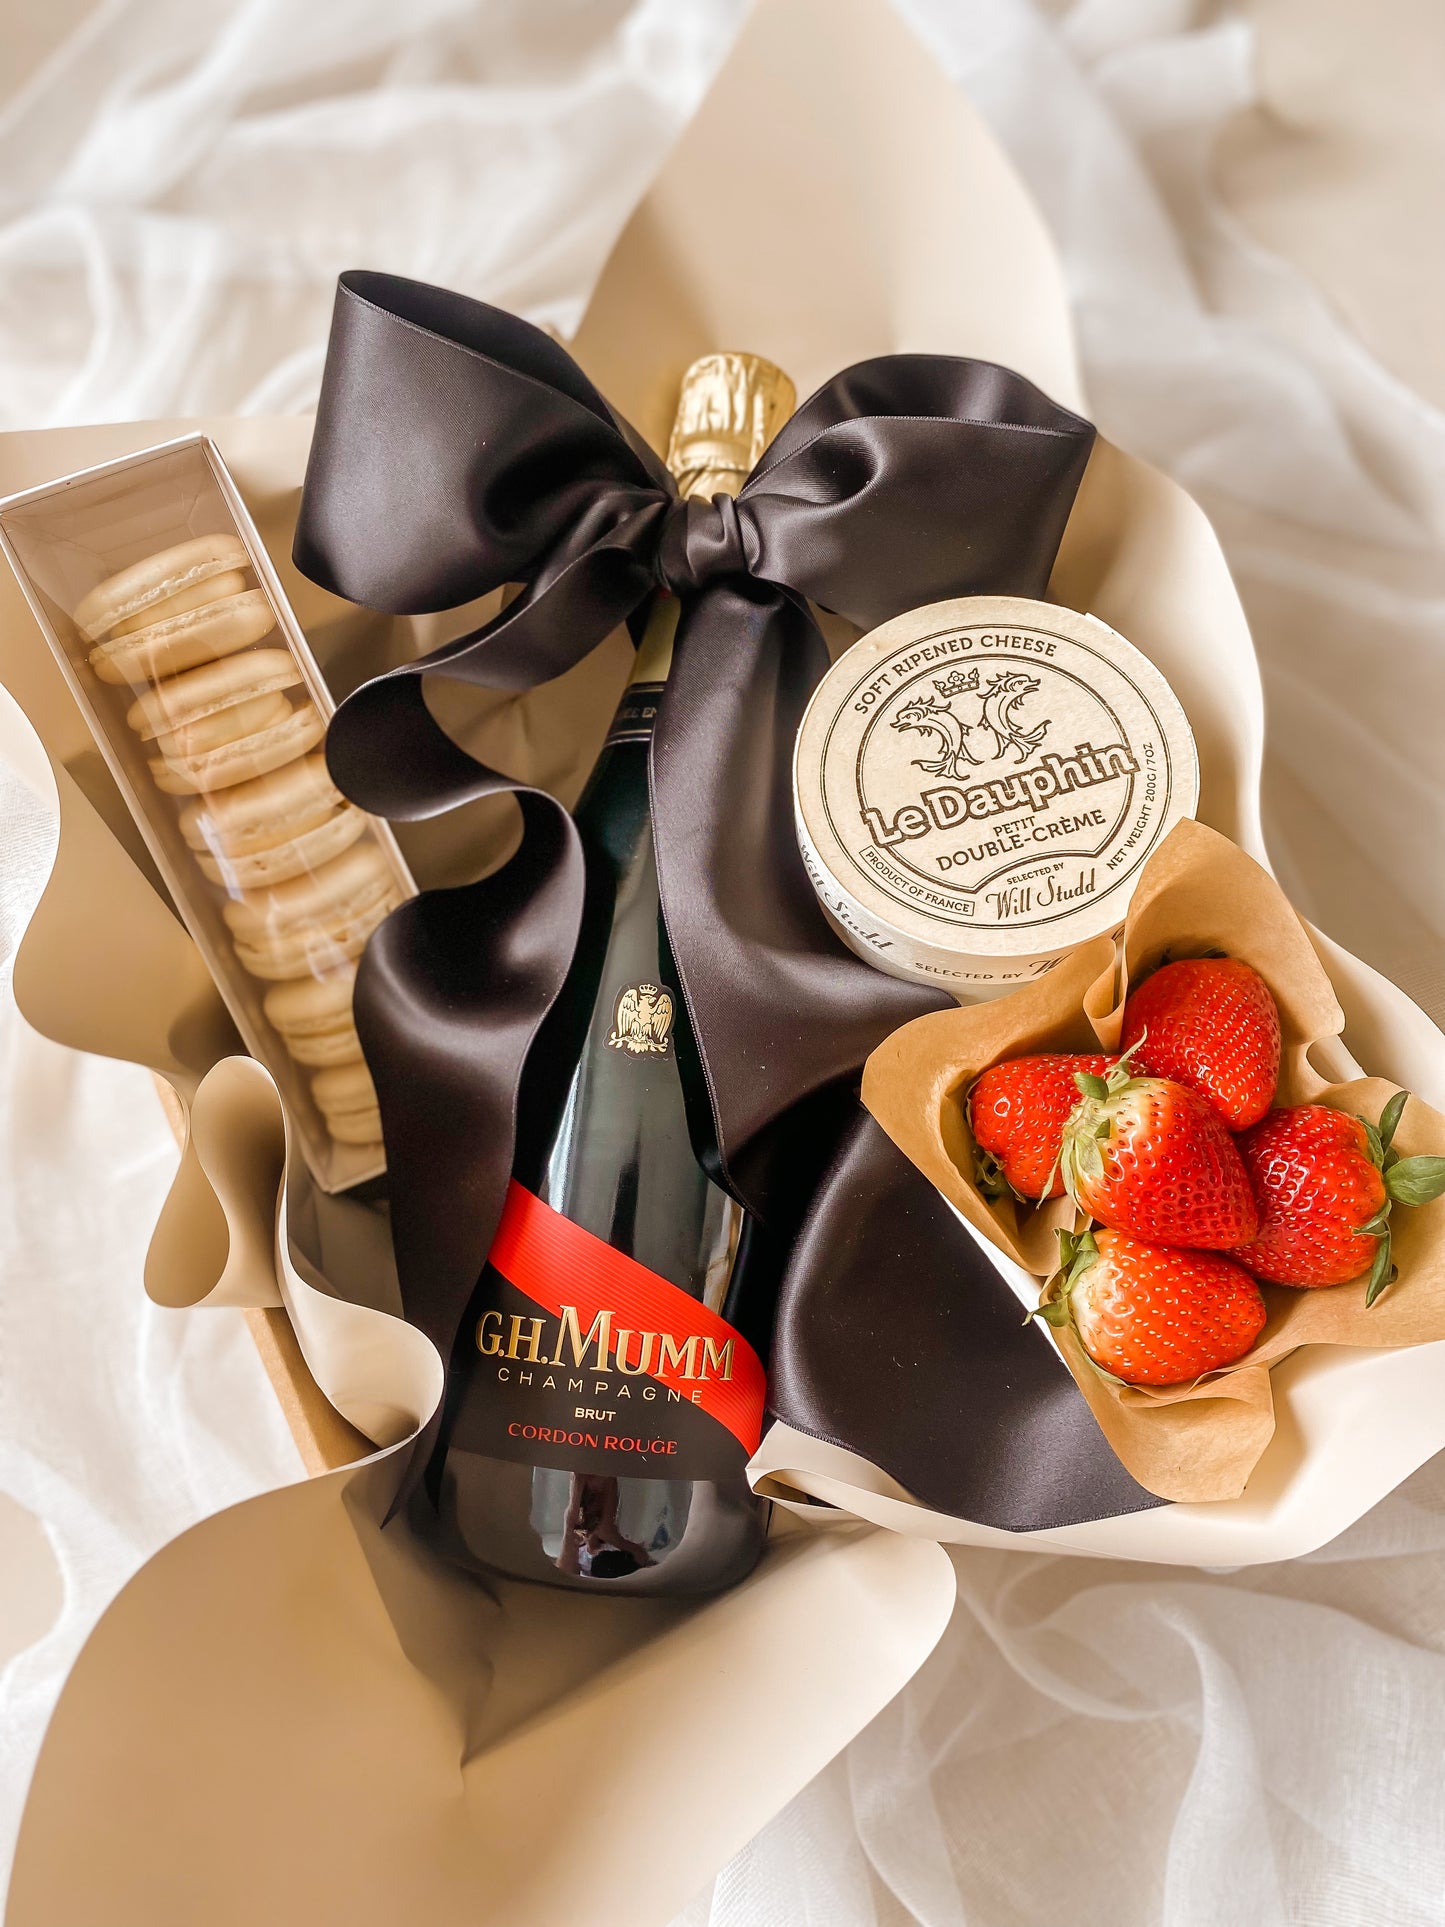 Say it with Champagne ~ G.H.Mumm Cordon Rouge